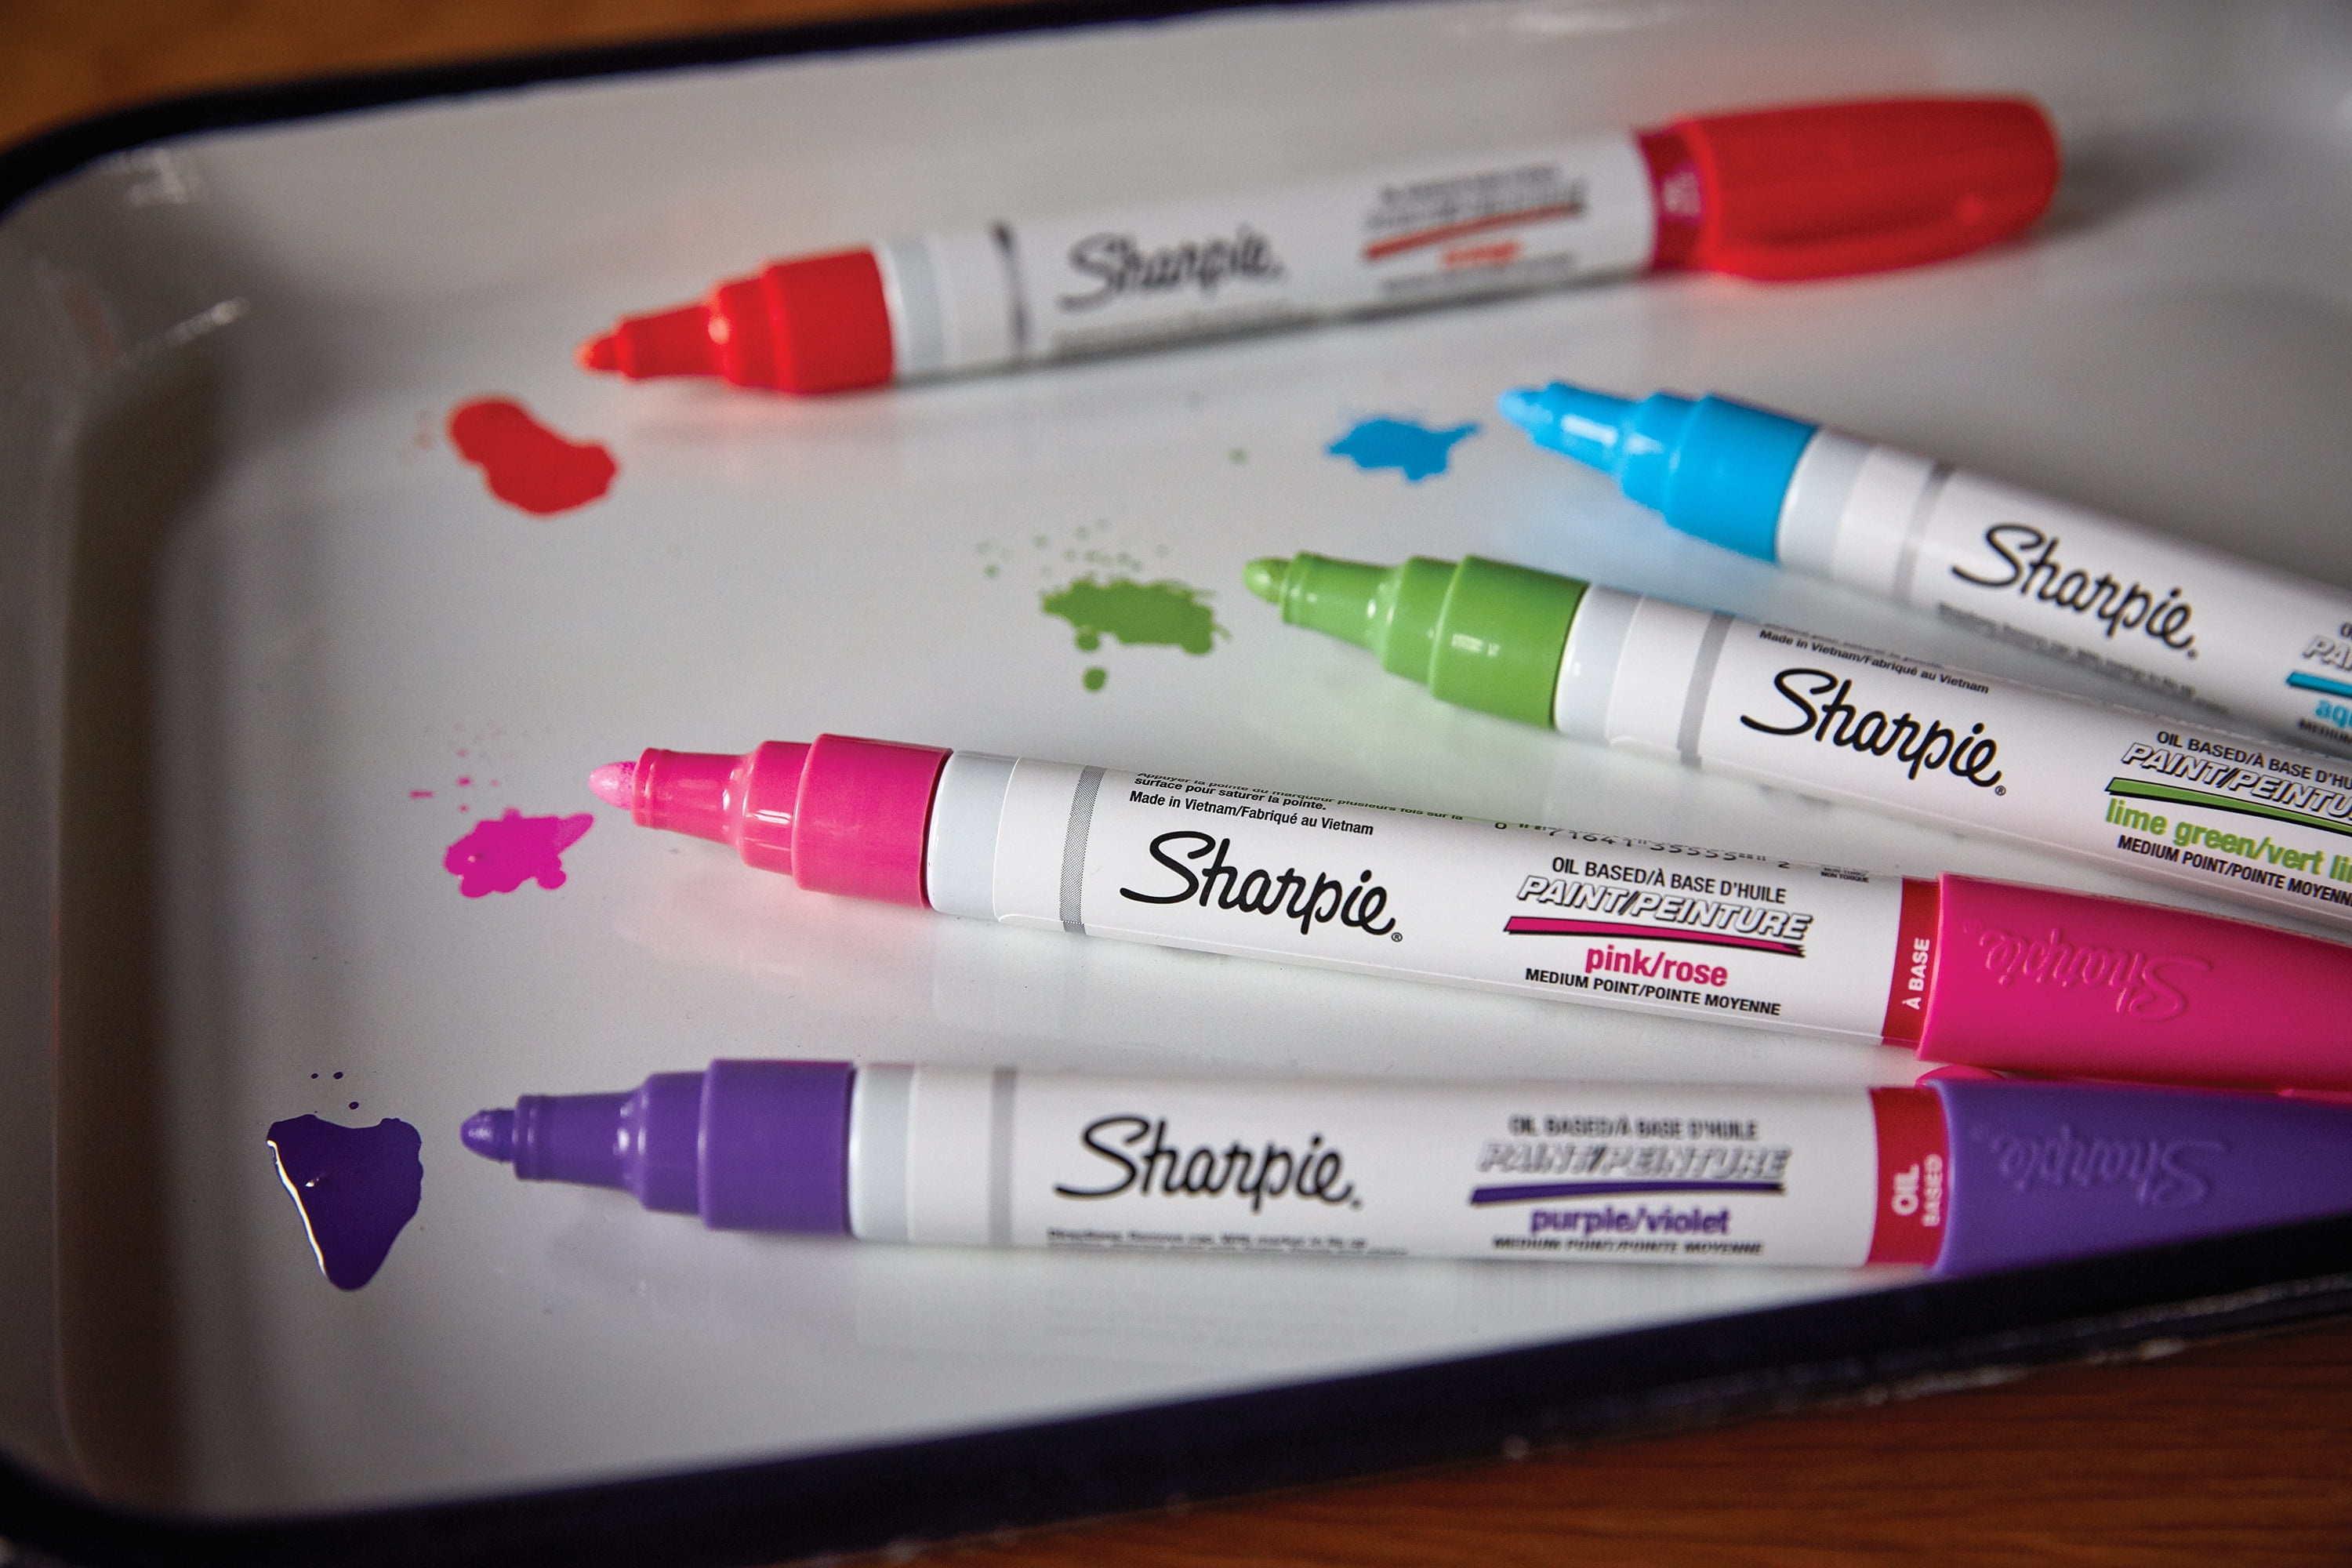 Sharpie Paint Markers halloween Colors Oil-based Permanent Markers, 5 Set  Medium Tip, Illustration, Drawing, Blending, Shading 